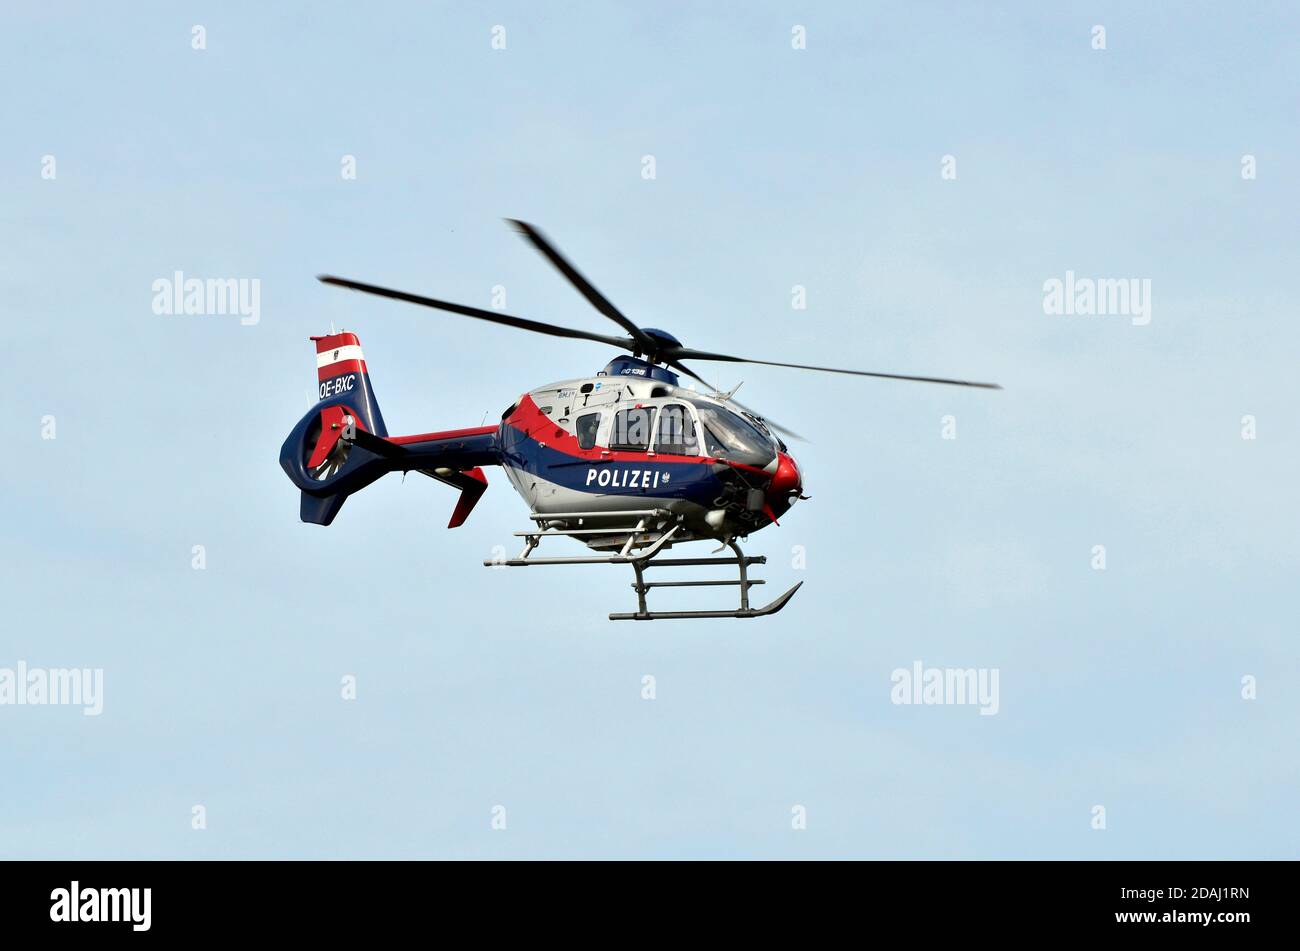 Eisenstadt, Austria - May 14, 2011: police helicopter - Eurocopter EC 135 - in operation for an accident Stock Photo